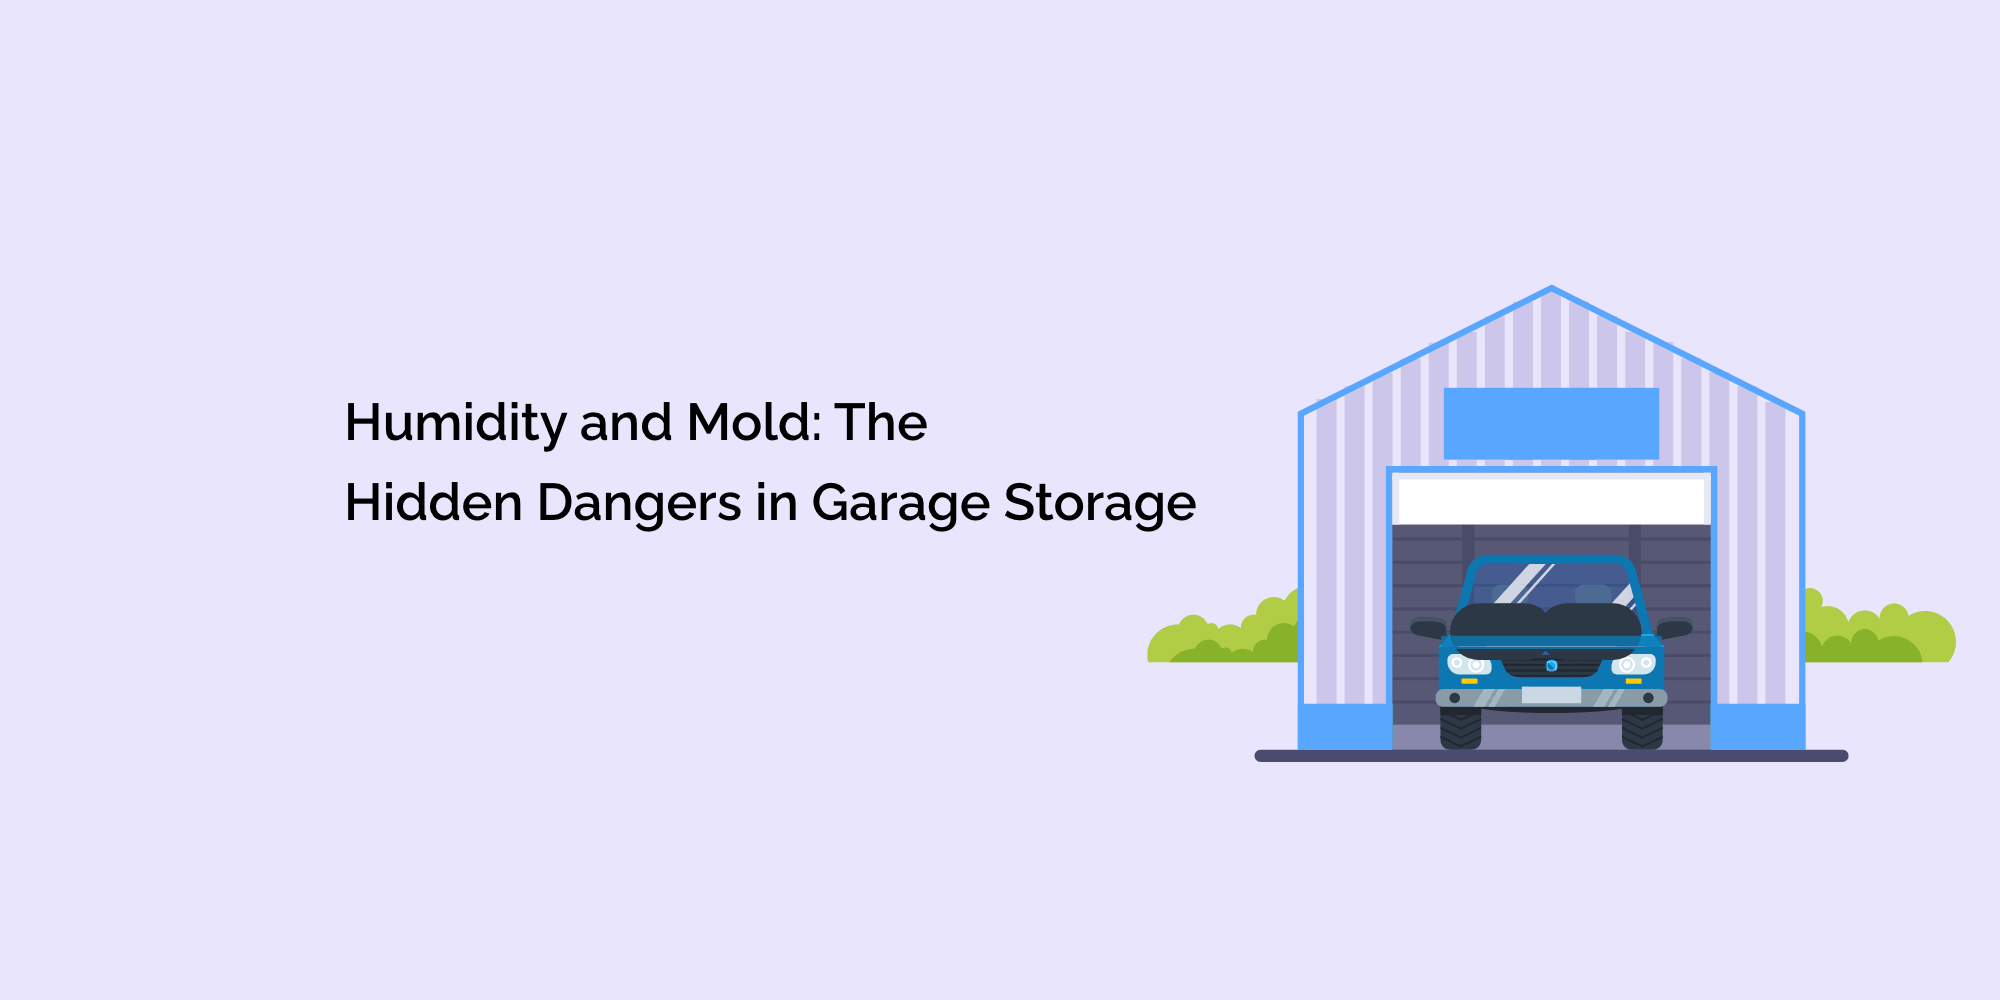 Humidity and Mold: The Hidden Dangers in Garage Storage